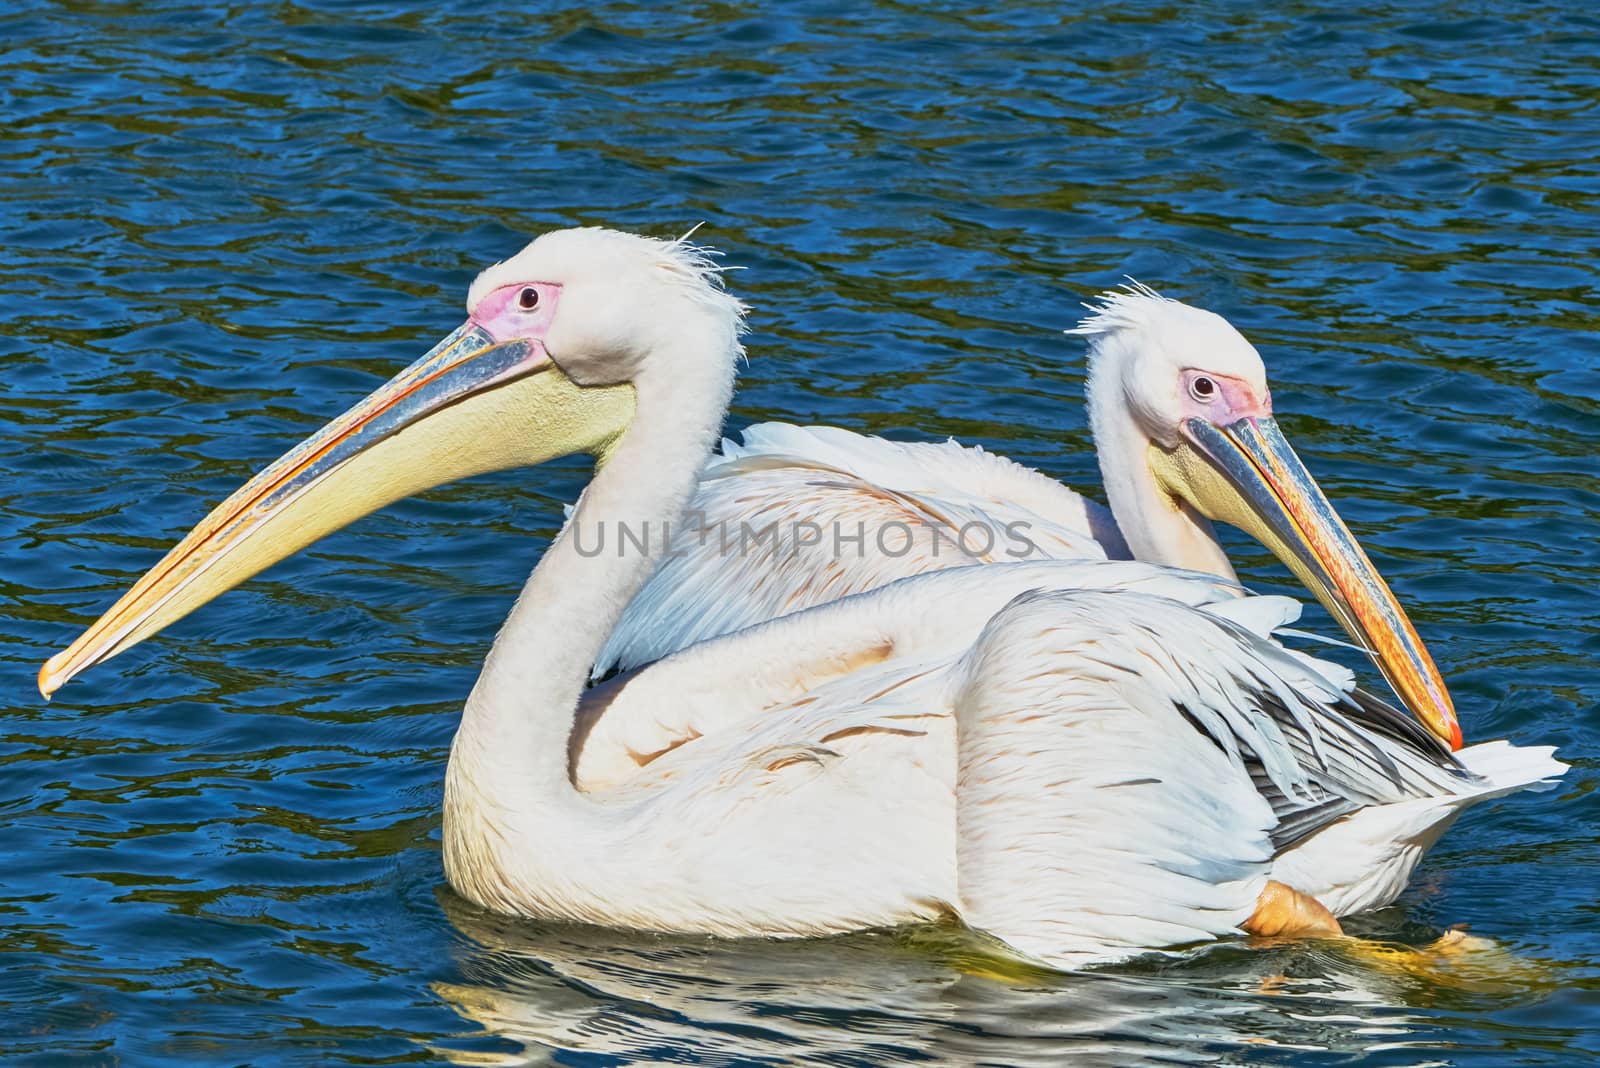 Two pelicans floating on the lake in the zoo                               